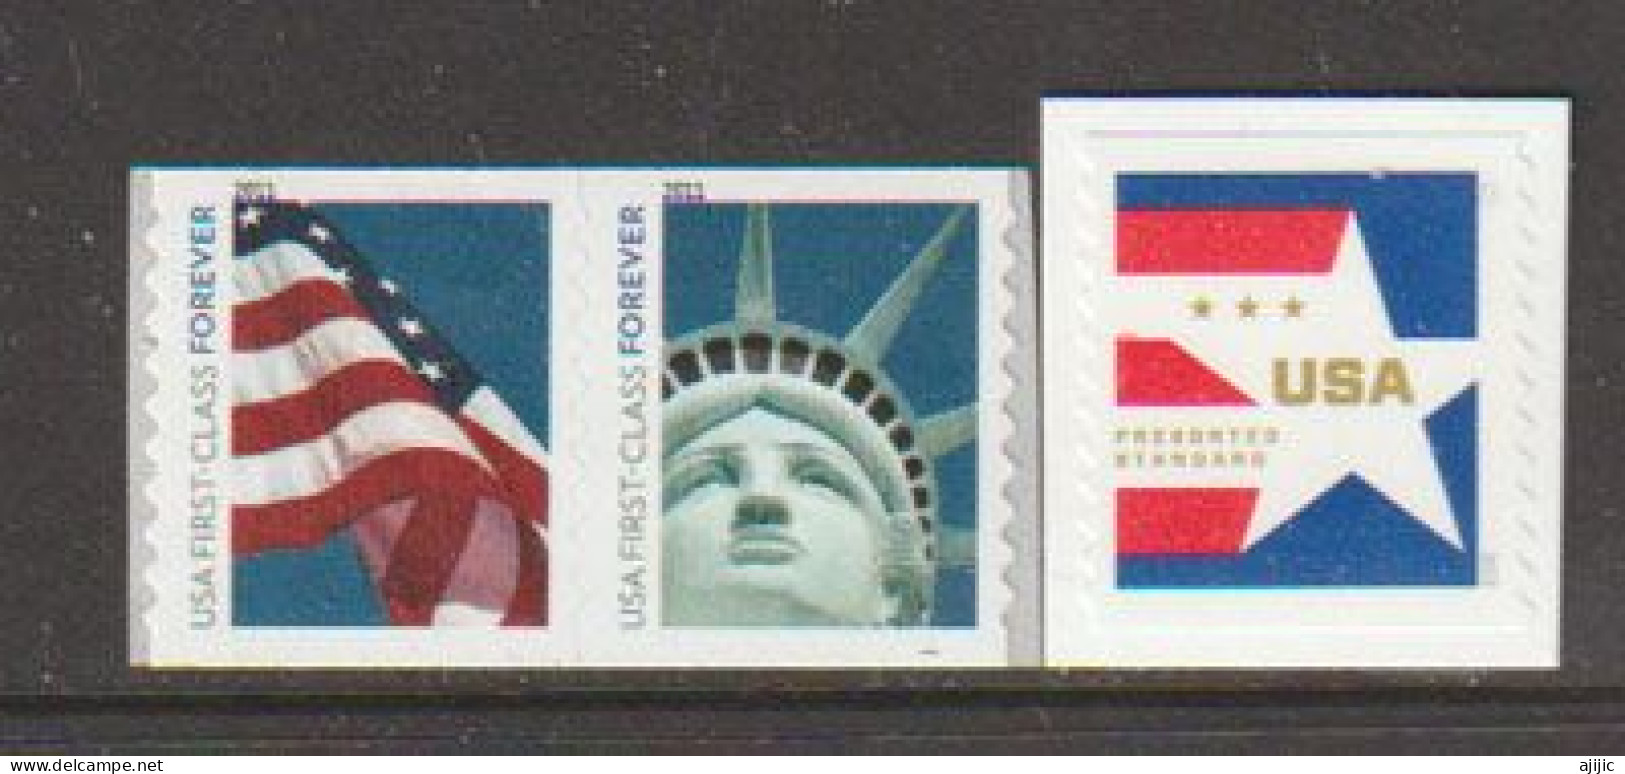 Flags USA (Star-Spangled Banner ) 3  Timbres Neufs **  (First Class Forever Stamps) - Ongebruikt